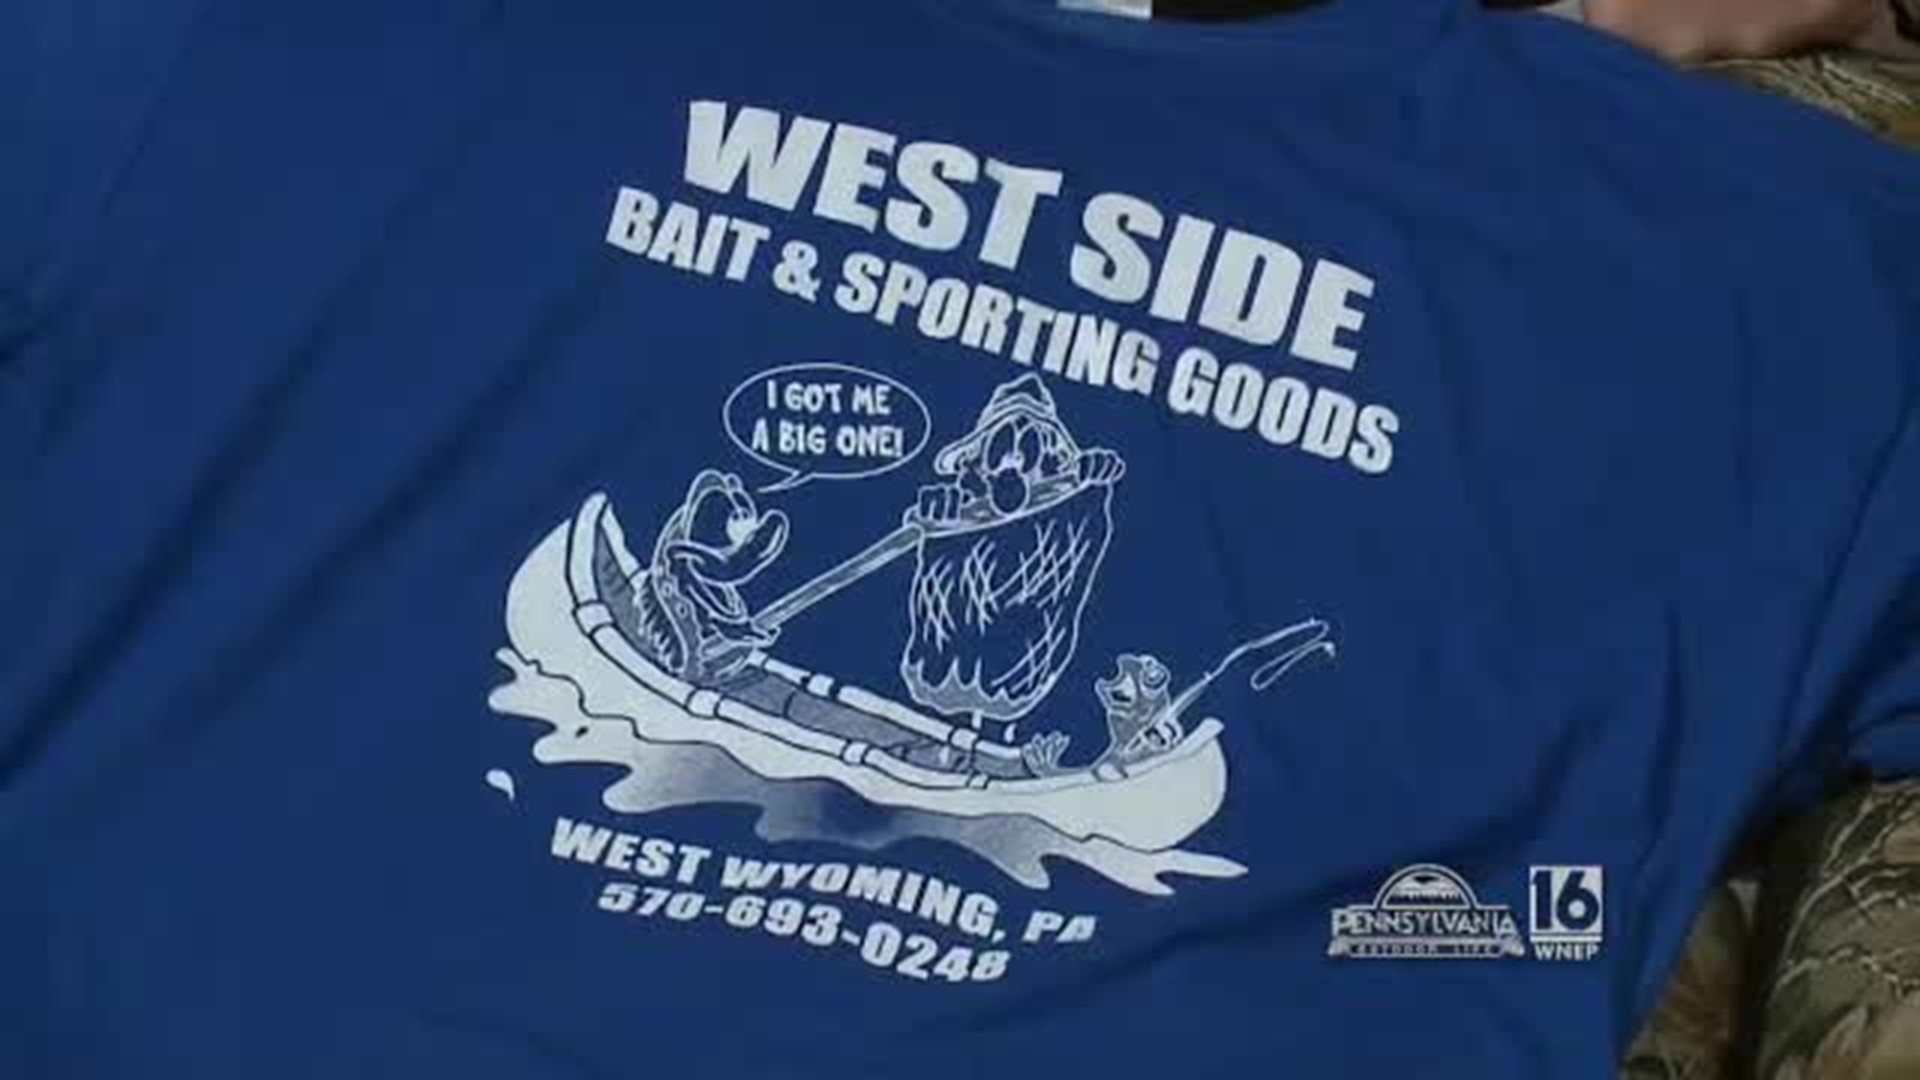 West Side Bait & Sporting Goods Product Giveaway